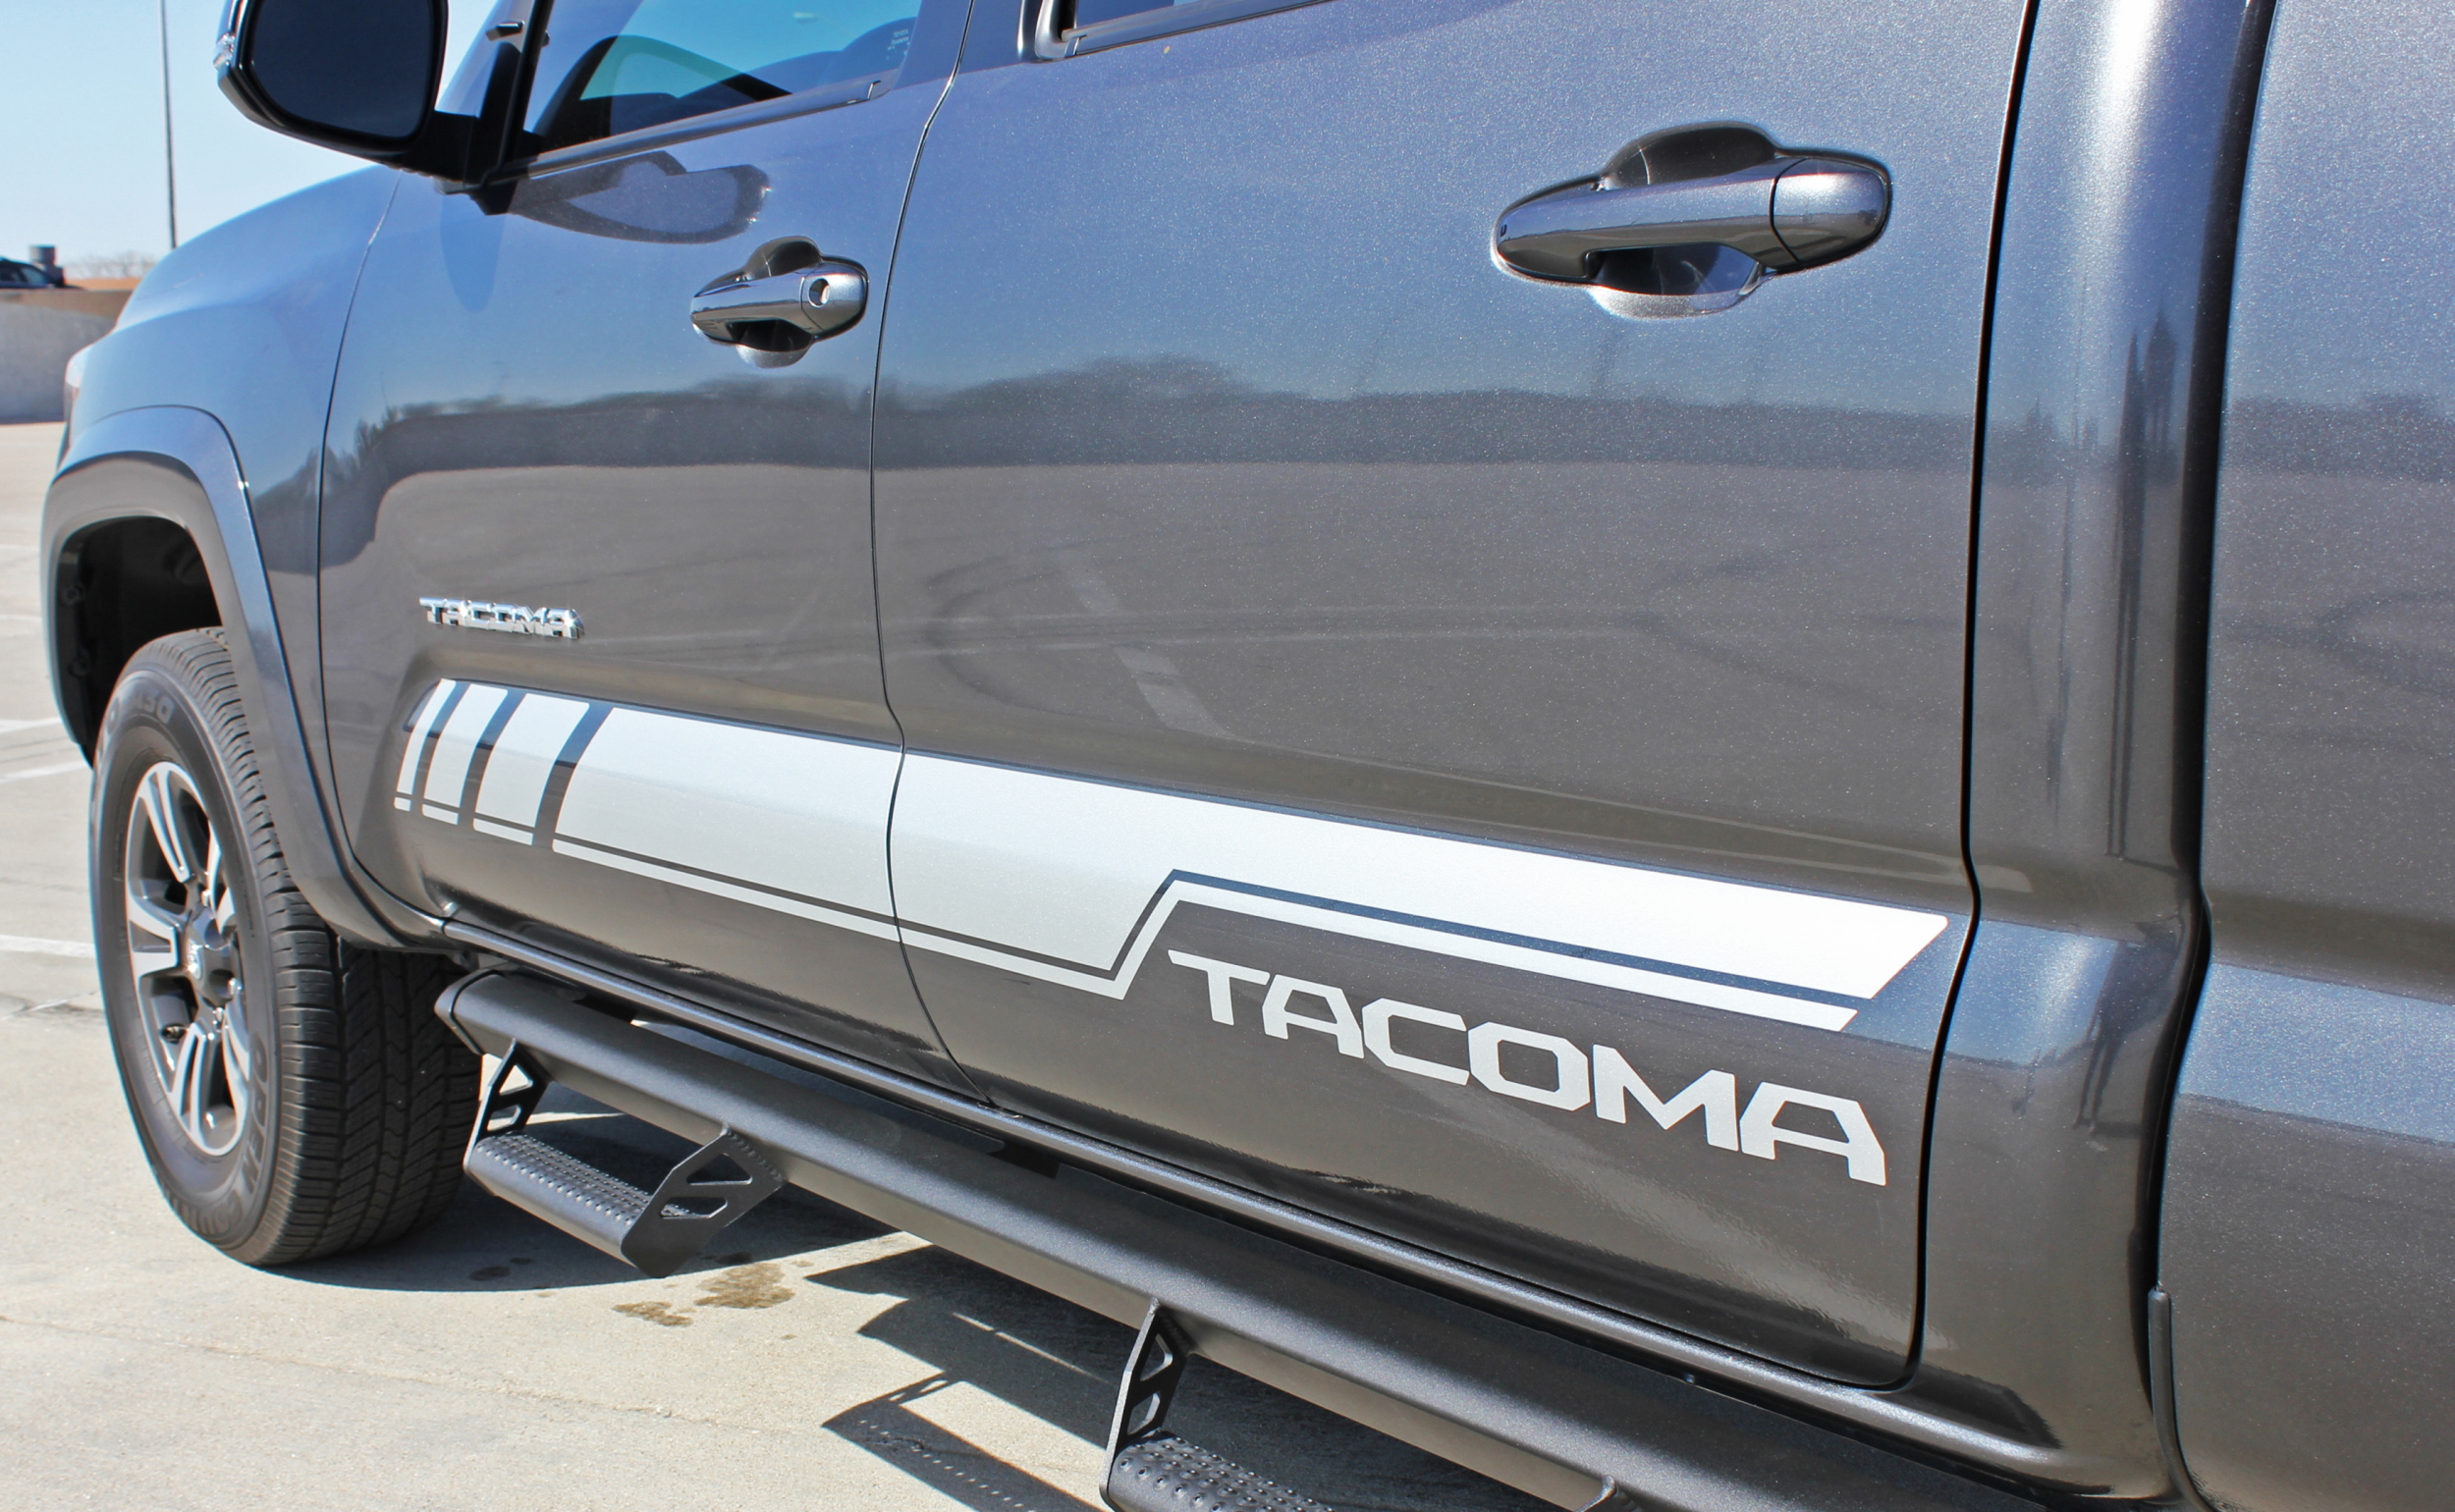 CORE - Toyota Tacoma Truck TRD Sport Pro 3M 1080 Vinyl Graphics, Stripes and Decals Package by MoProAuto Pro Design Series